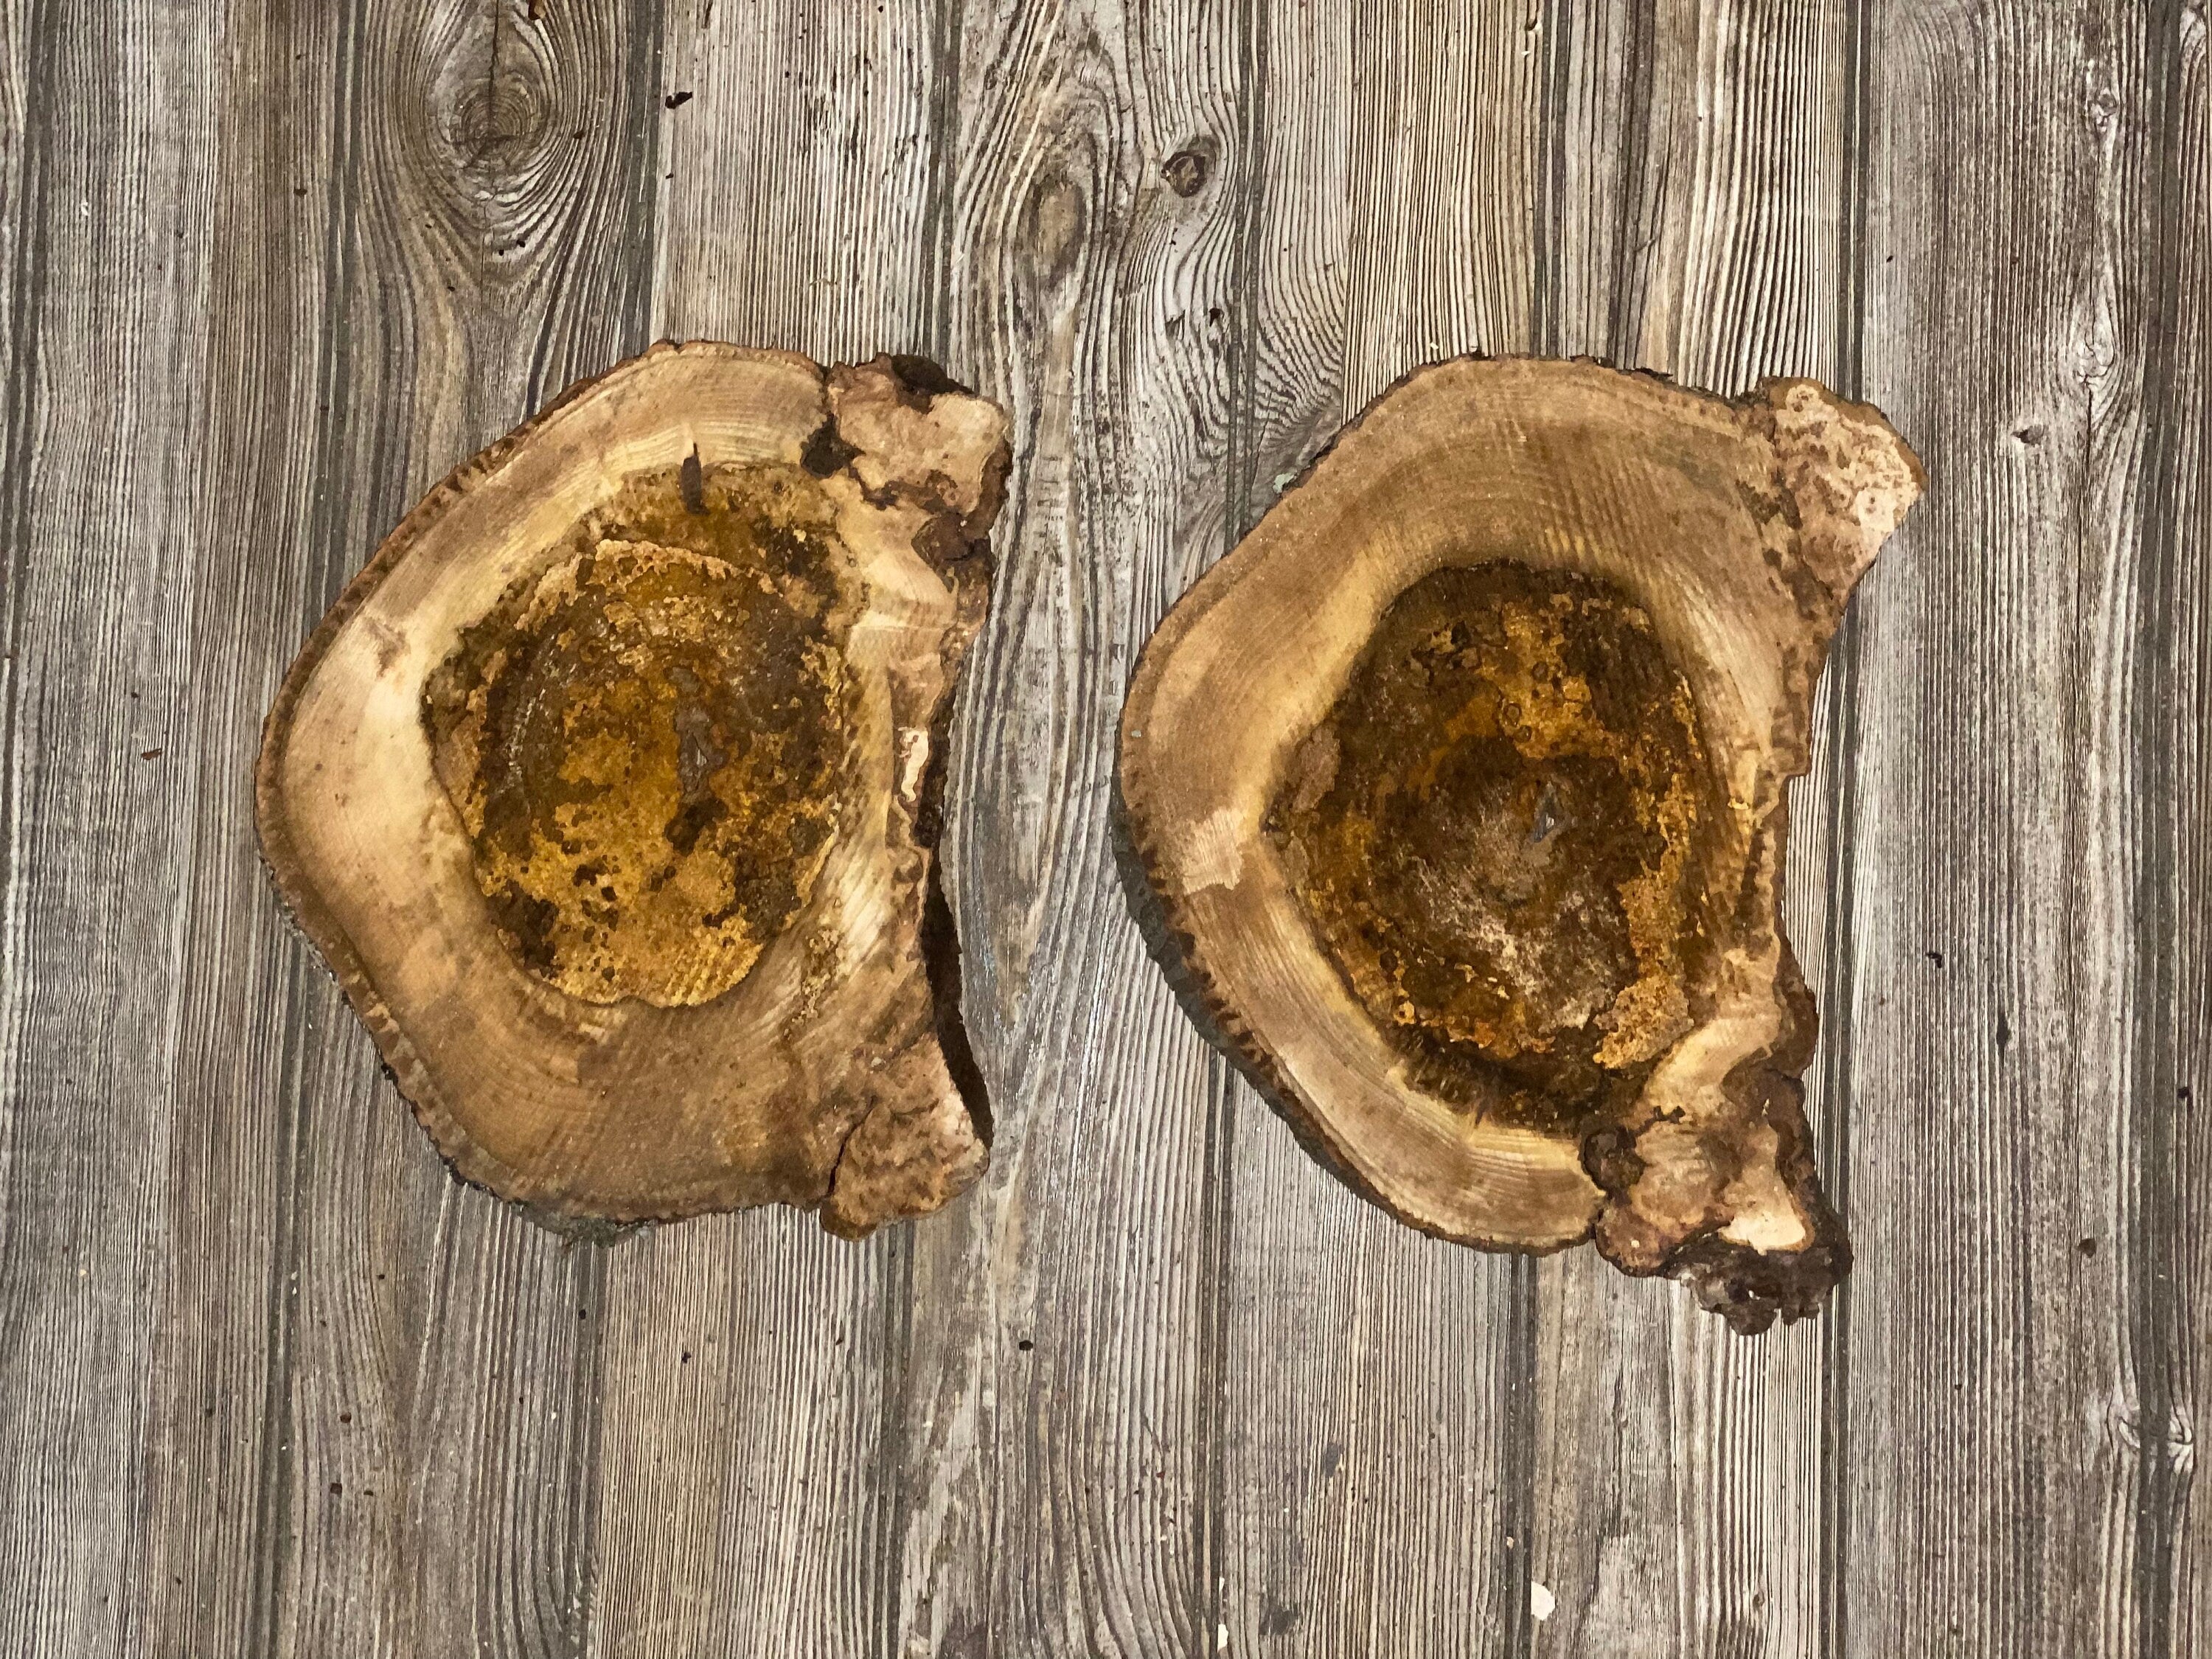 Two Hickory Burl Slices, Approximately 11.5-12 Inches Long by 9 Inches Wide and 3/4 Inch Thick